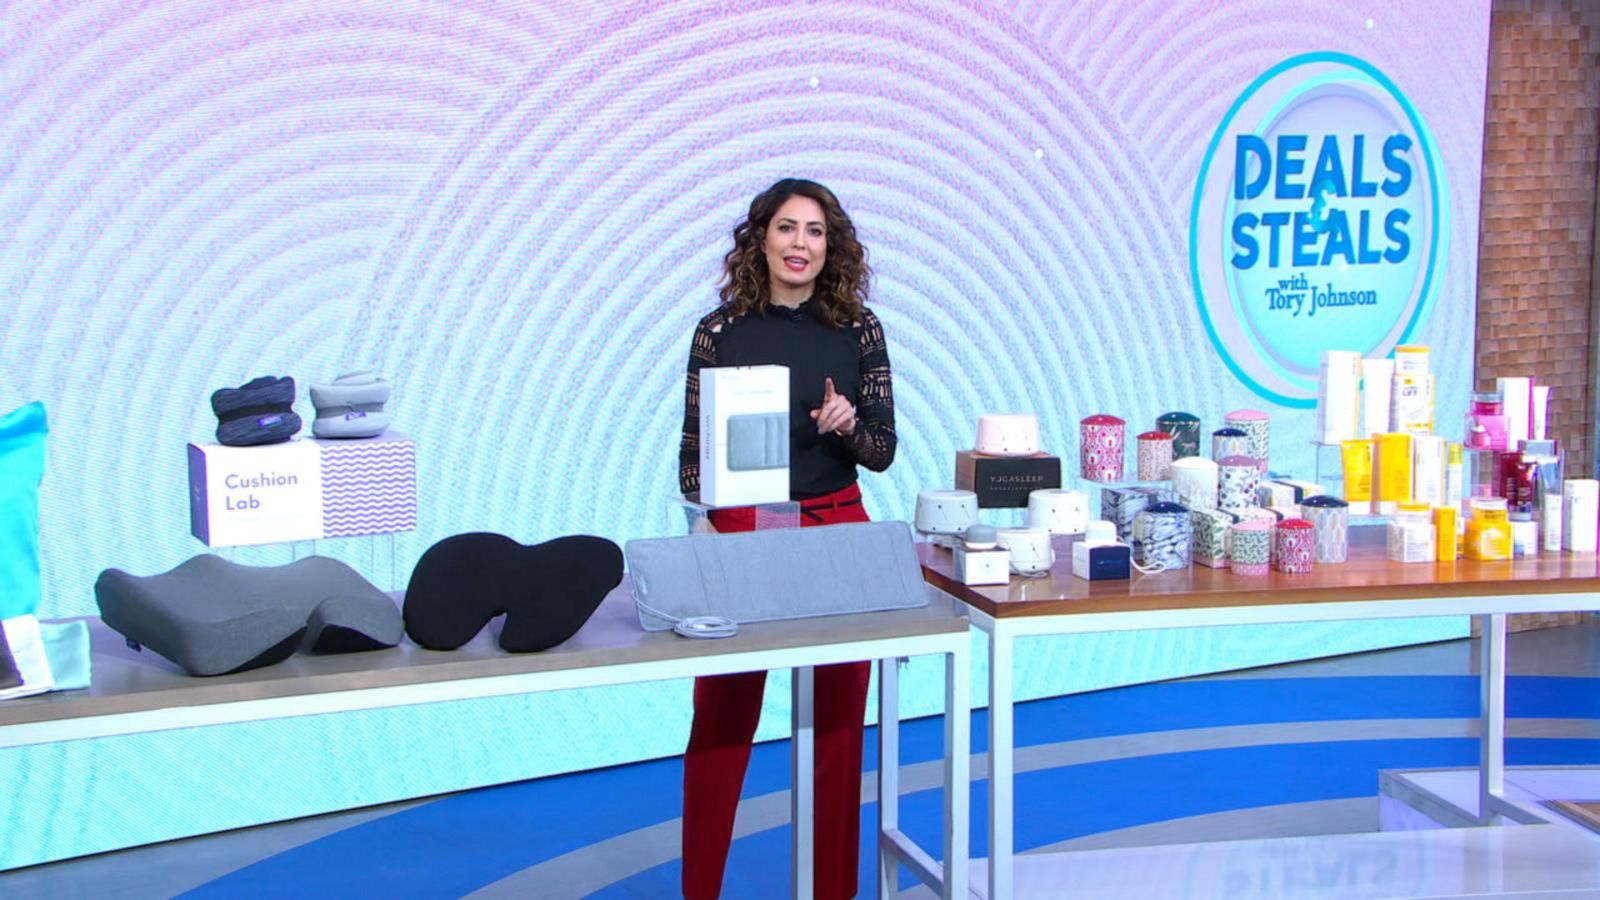 GMA' Deals & Steals for comfort - Good Morning America